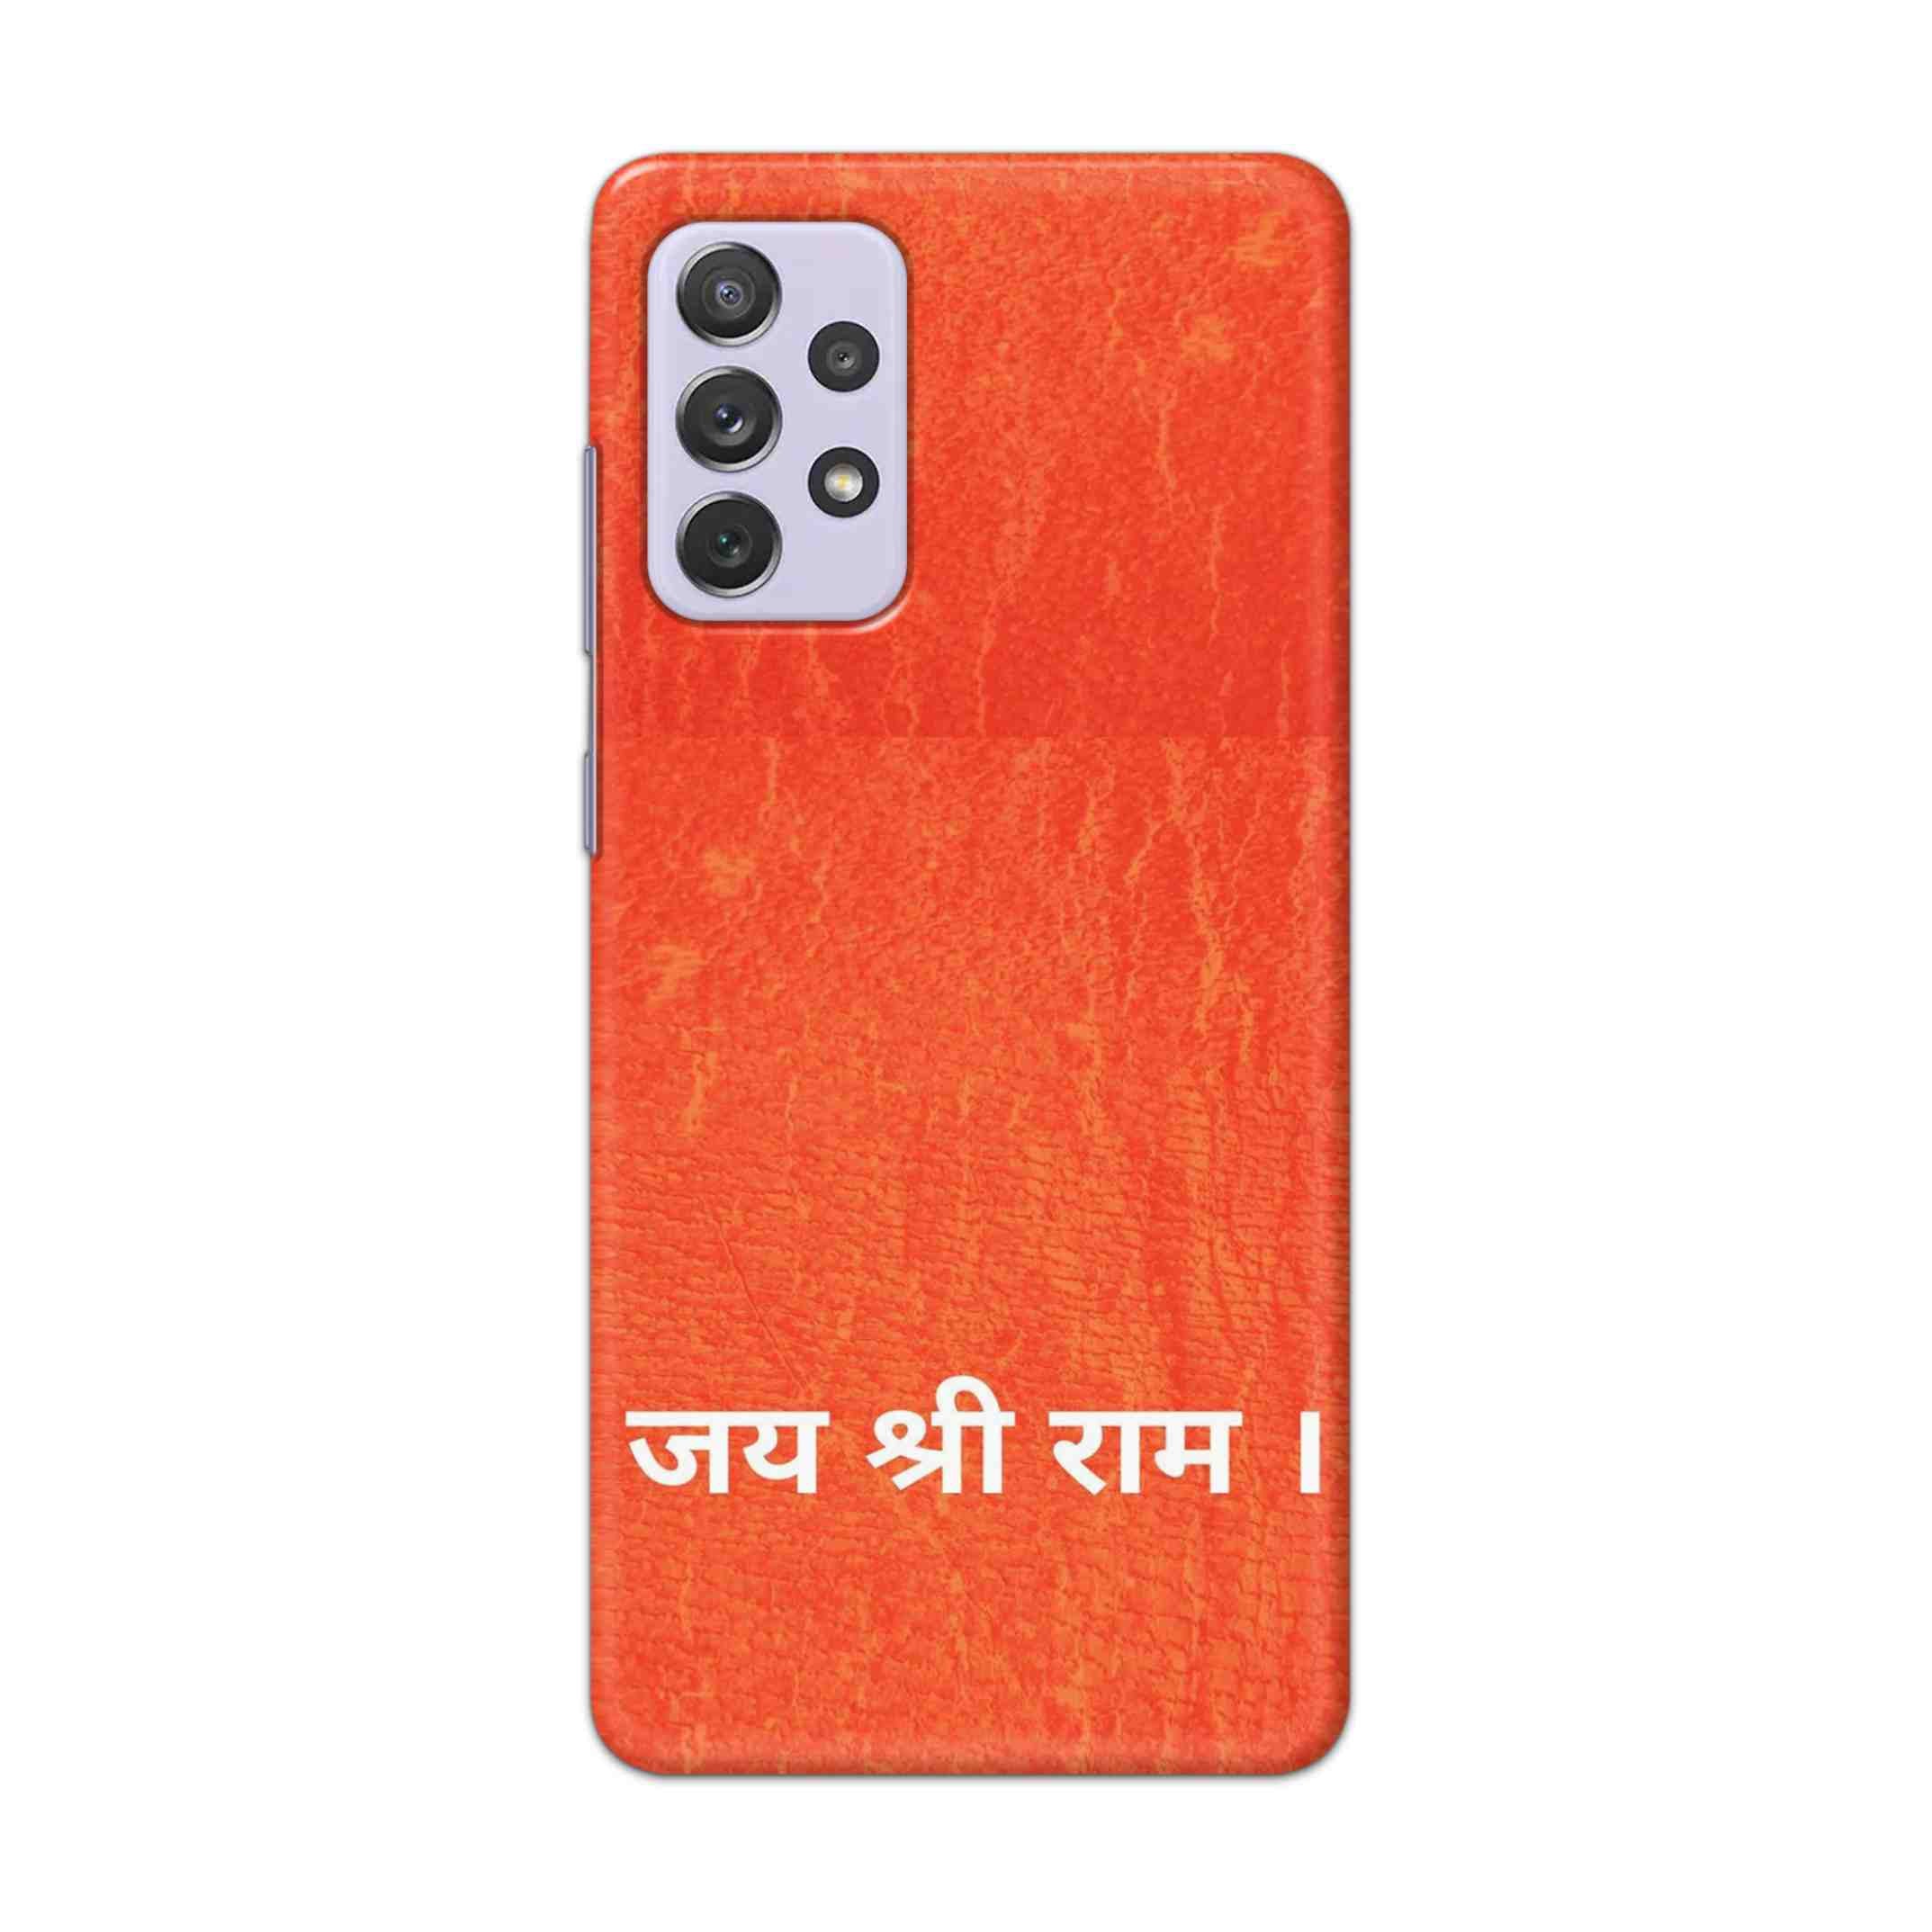 Buy Jai Shree Ram Hard Back Mobile Phone Case Cover For Samsung Galaxy A72 Online